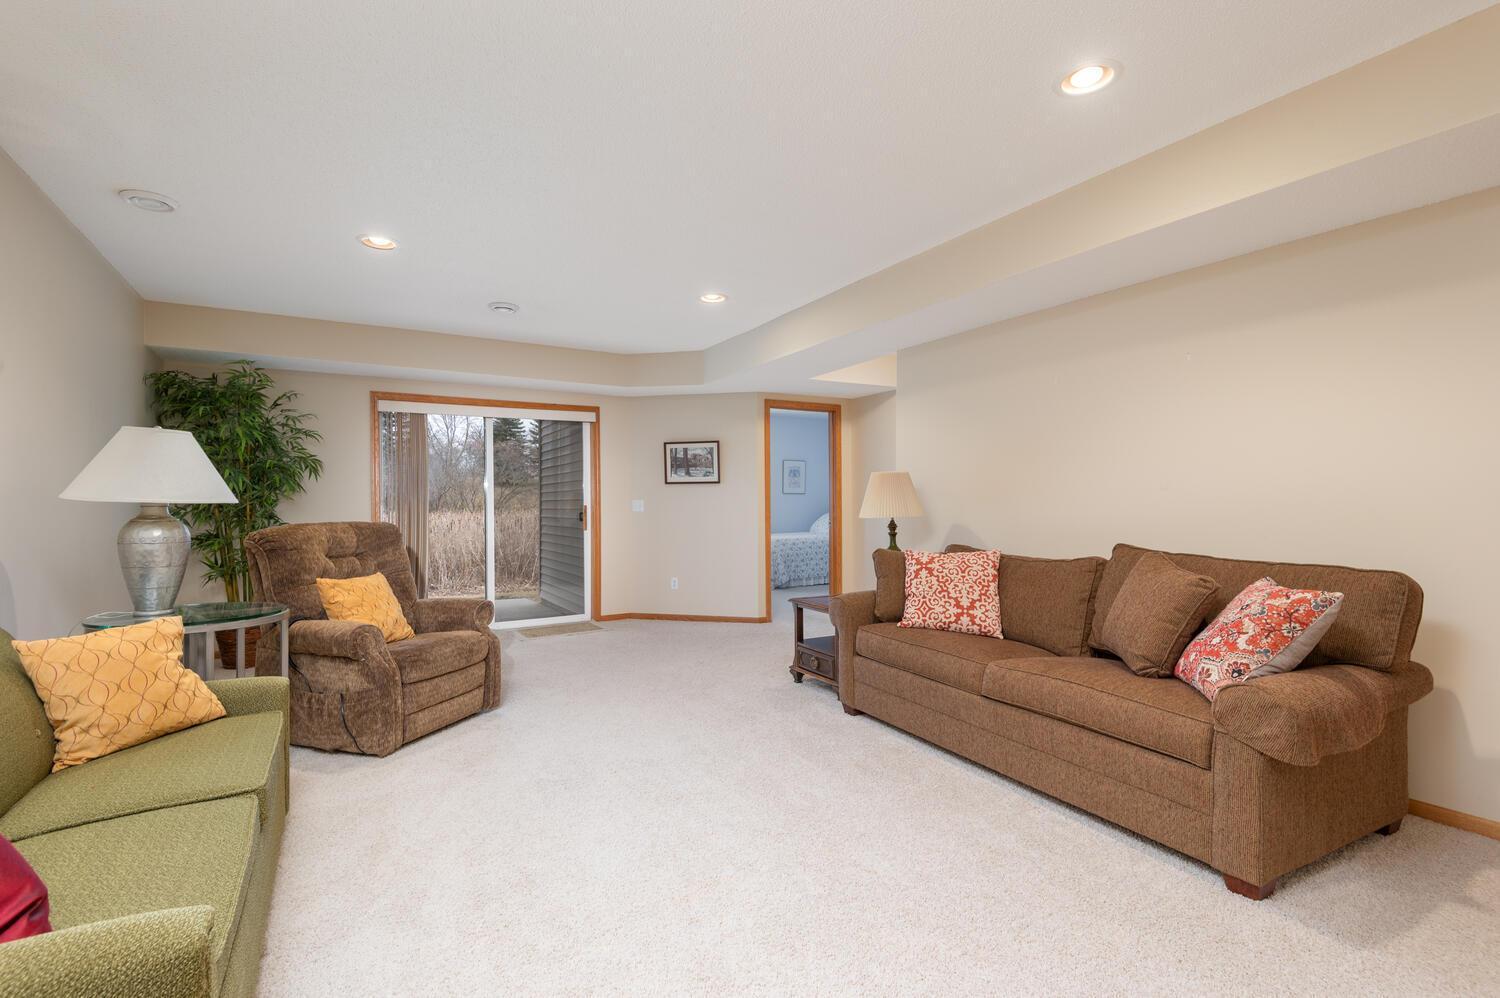 Plenty of room for a sectional and your home entertainment center. Or perhaps set up your favorite game table.